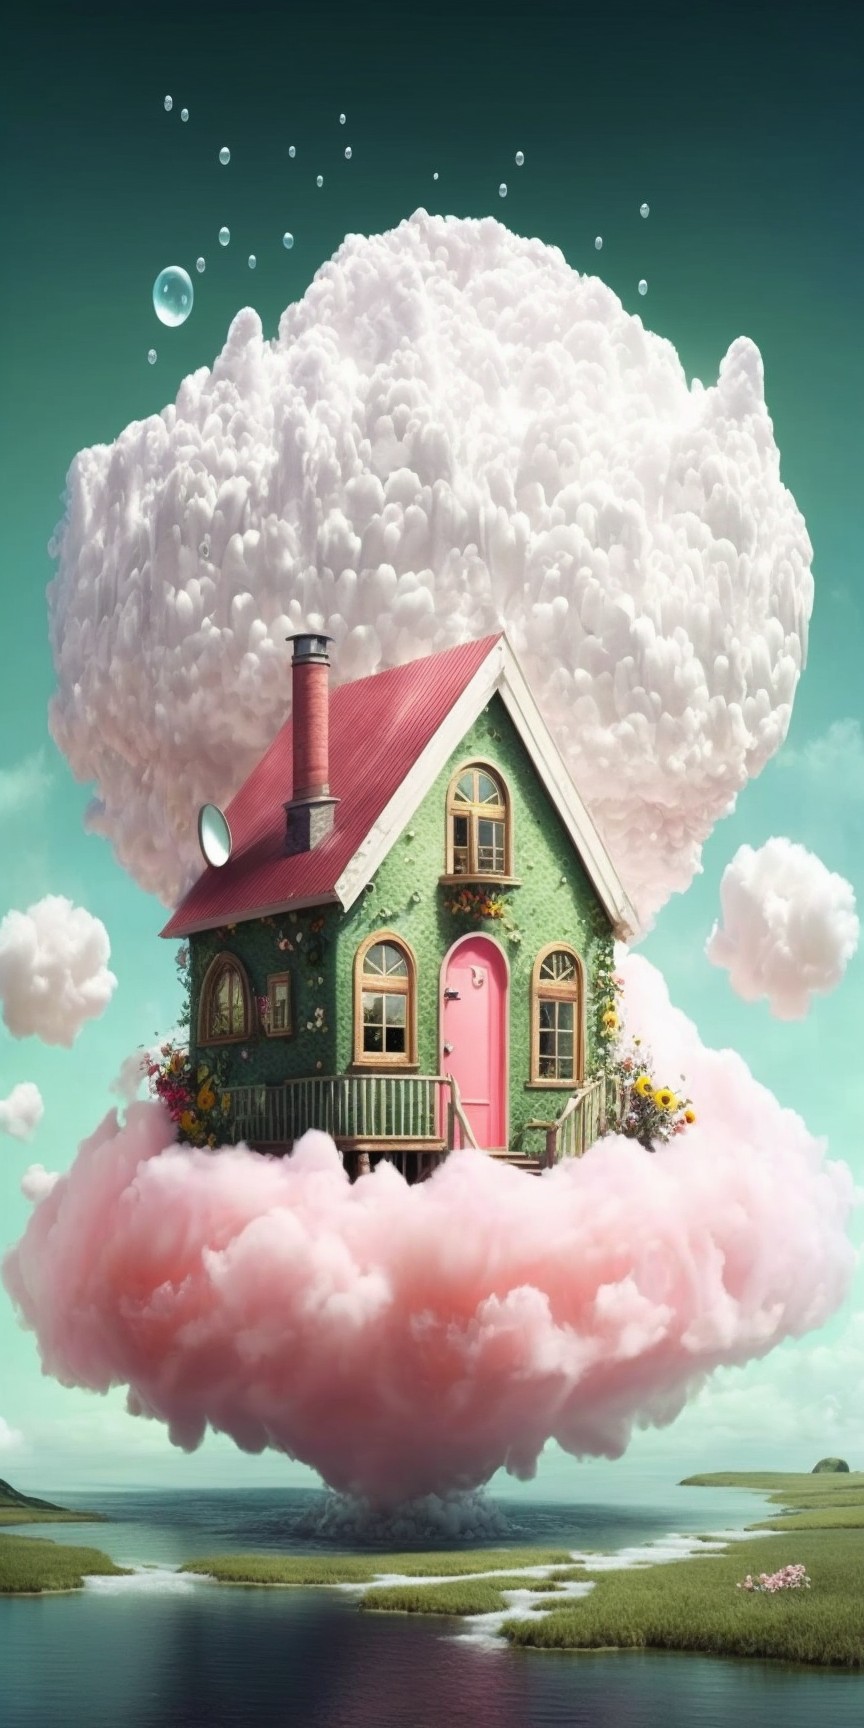 8 images of little house in the cloud by Midjourney